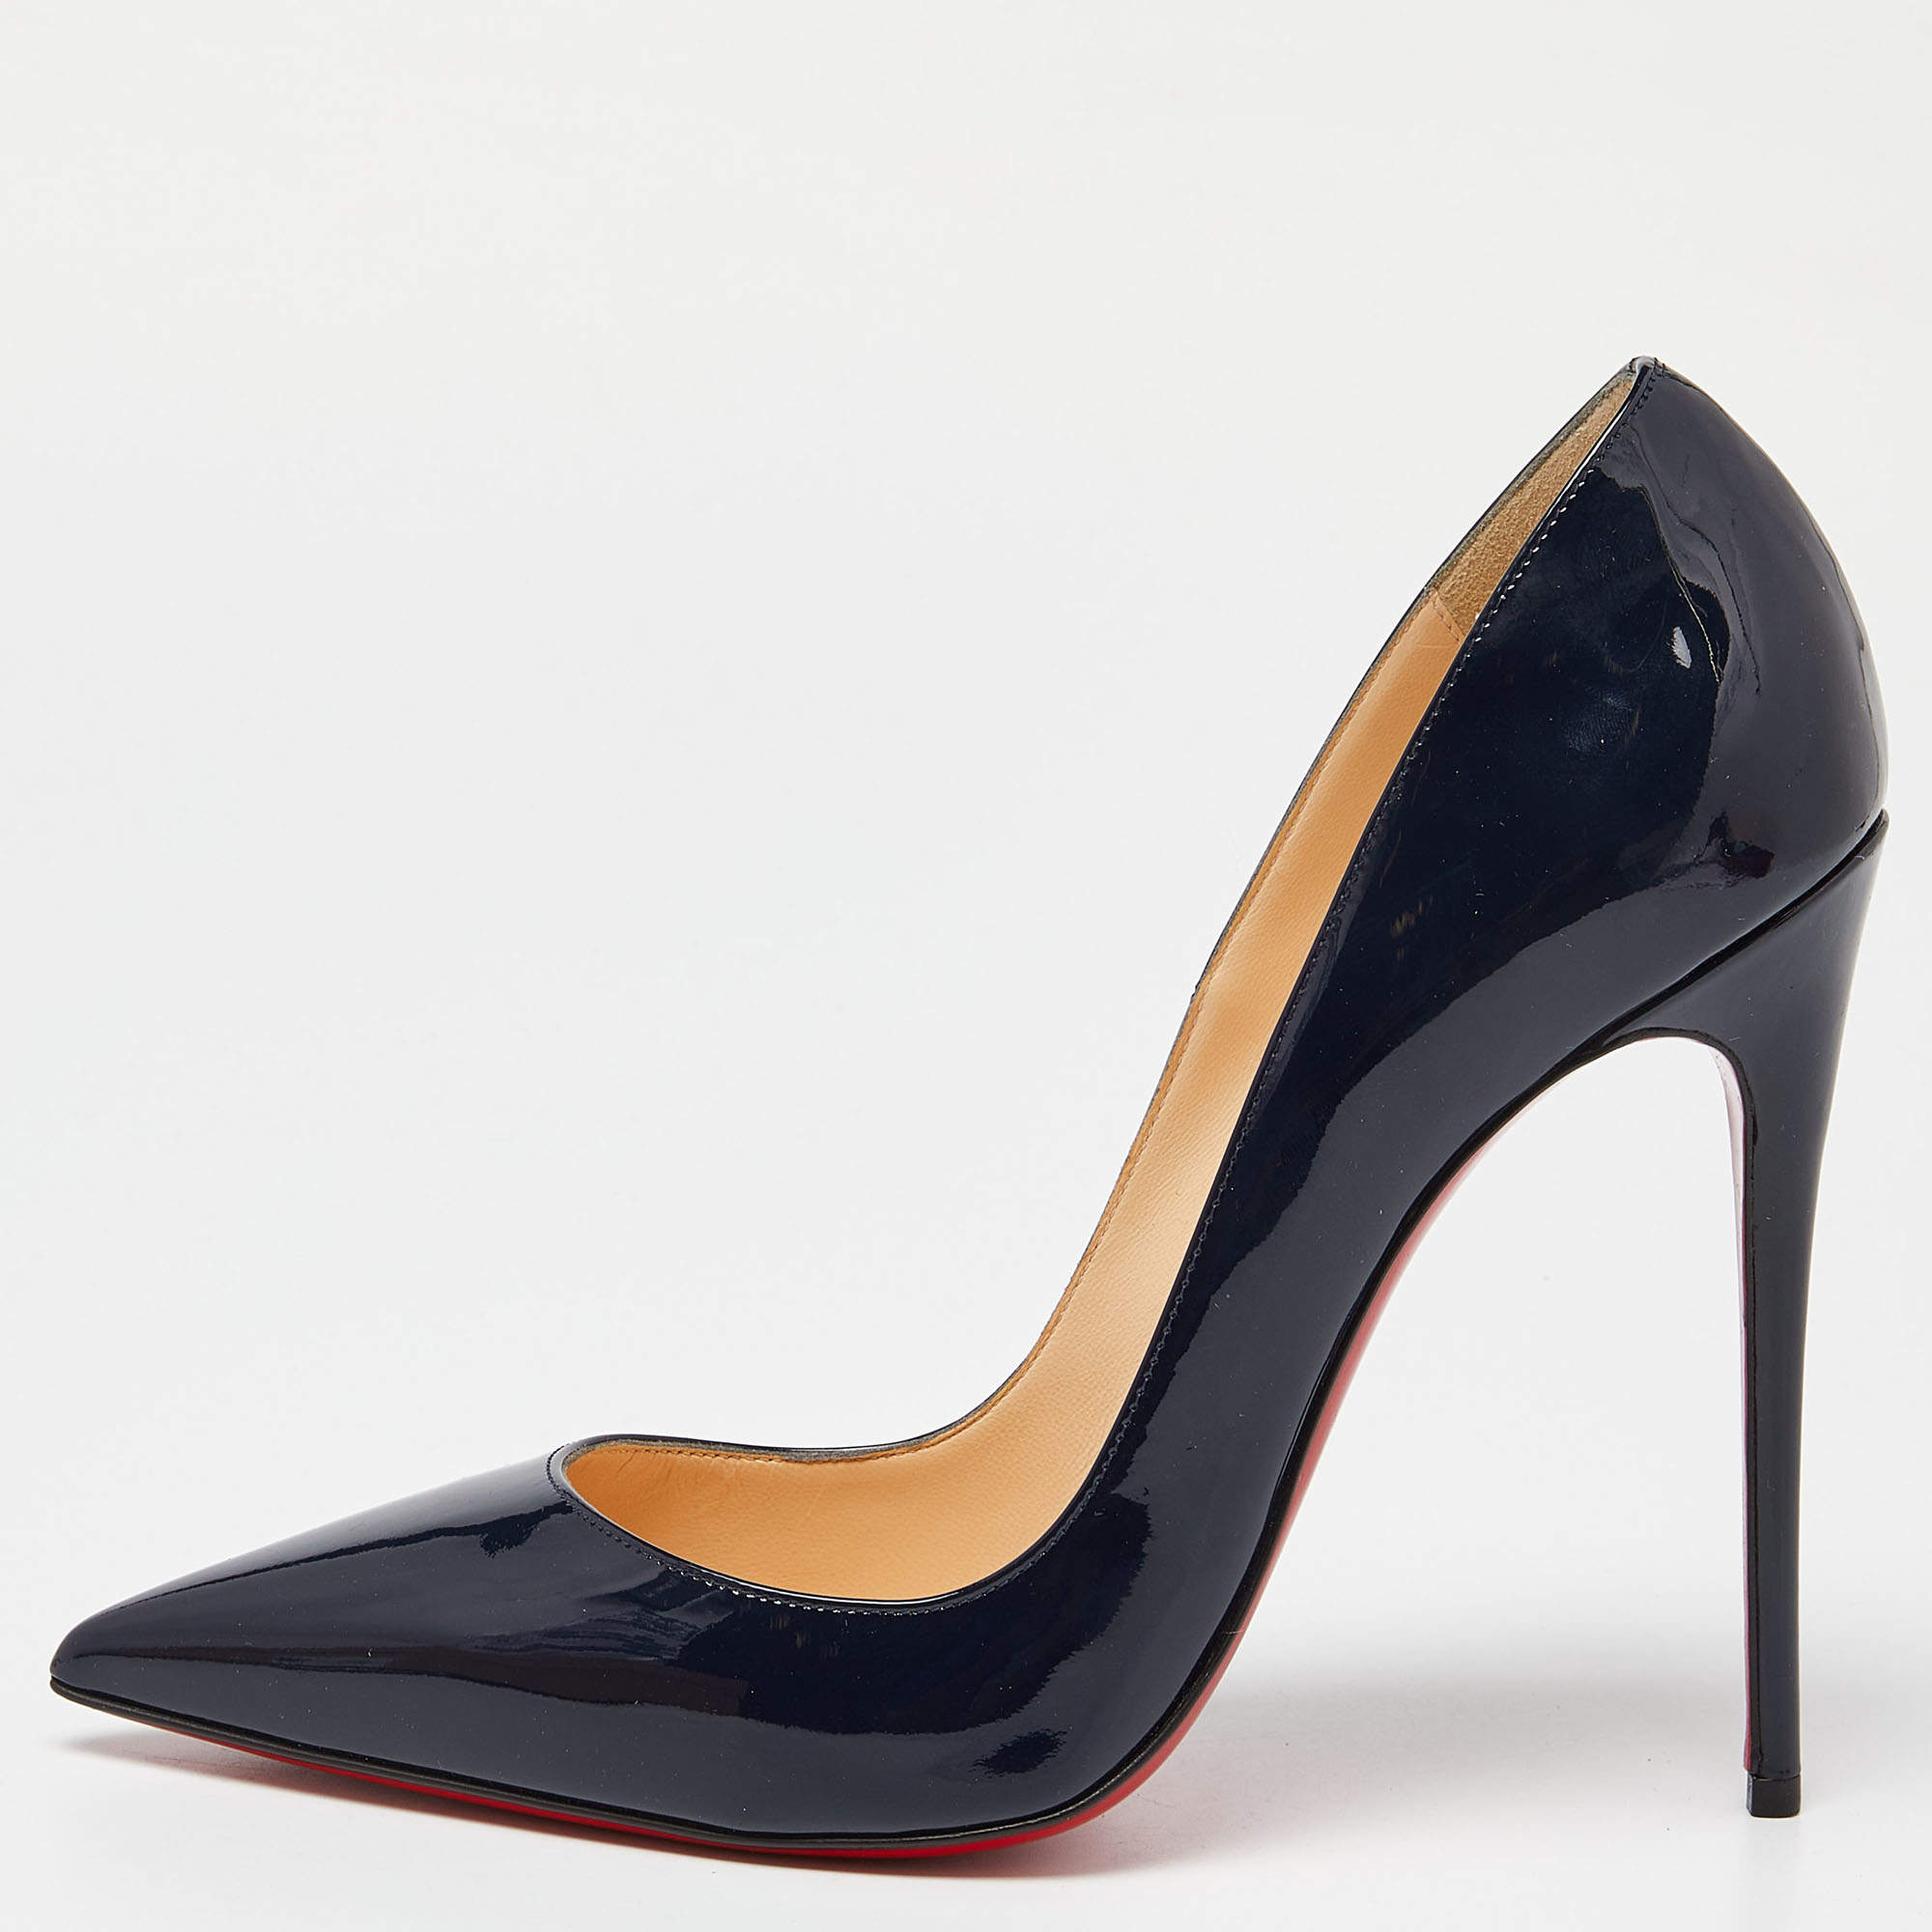 Christian Louboutin Blue Patent Leather So Kate Pumps Size 39.5 